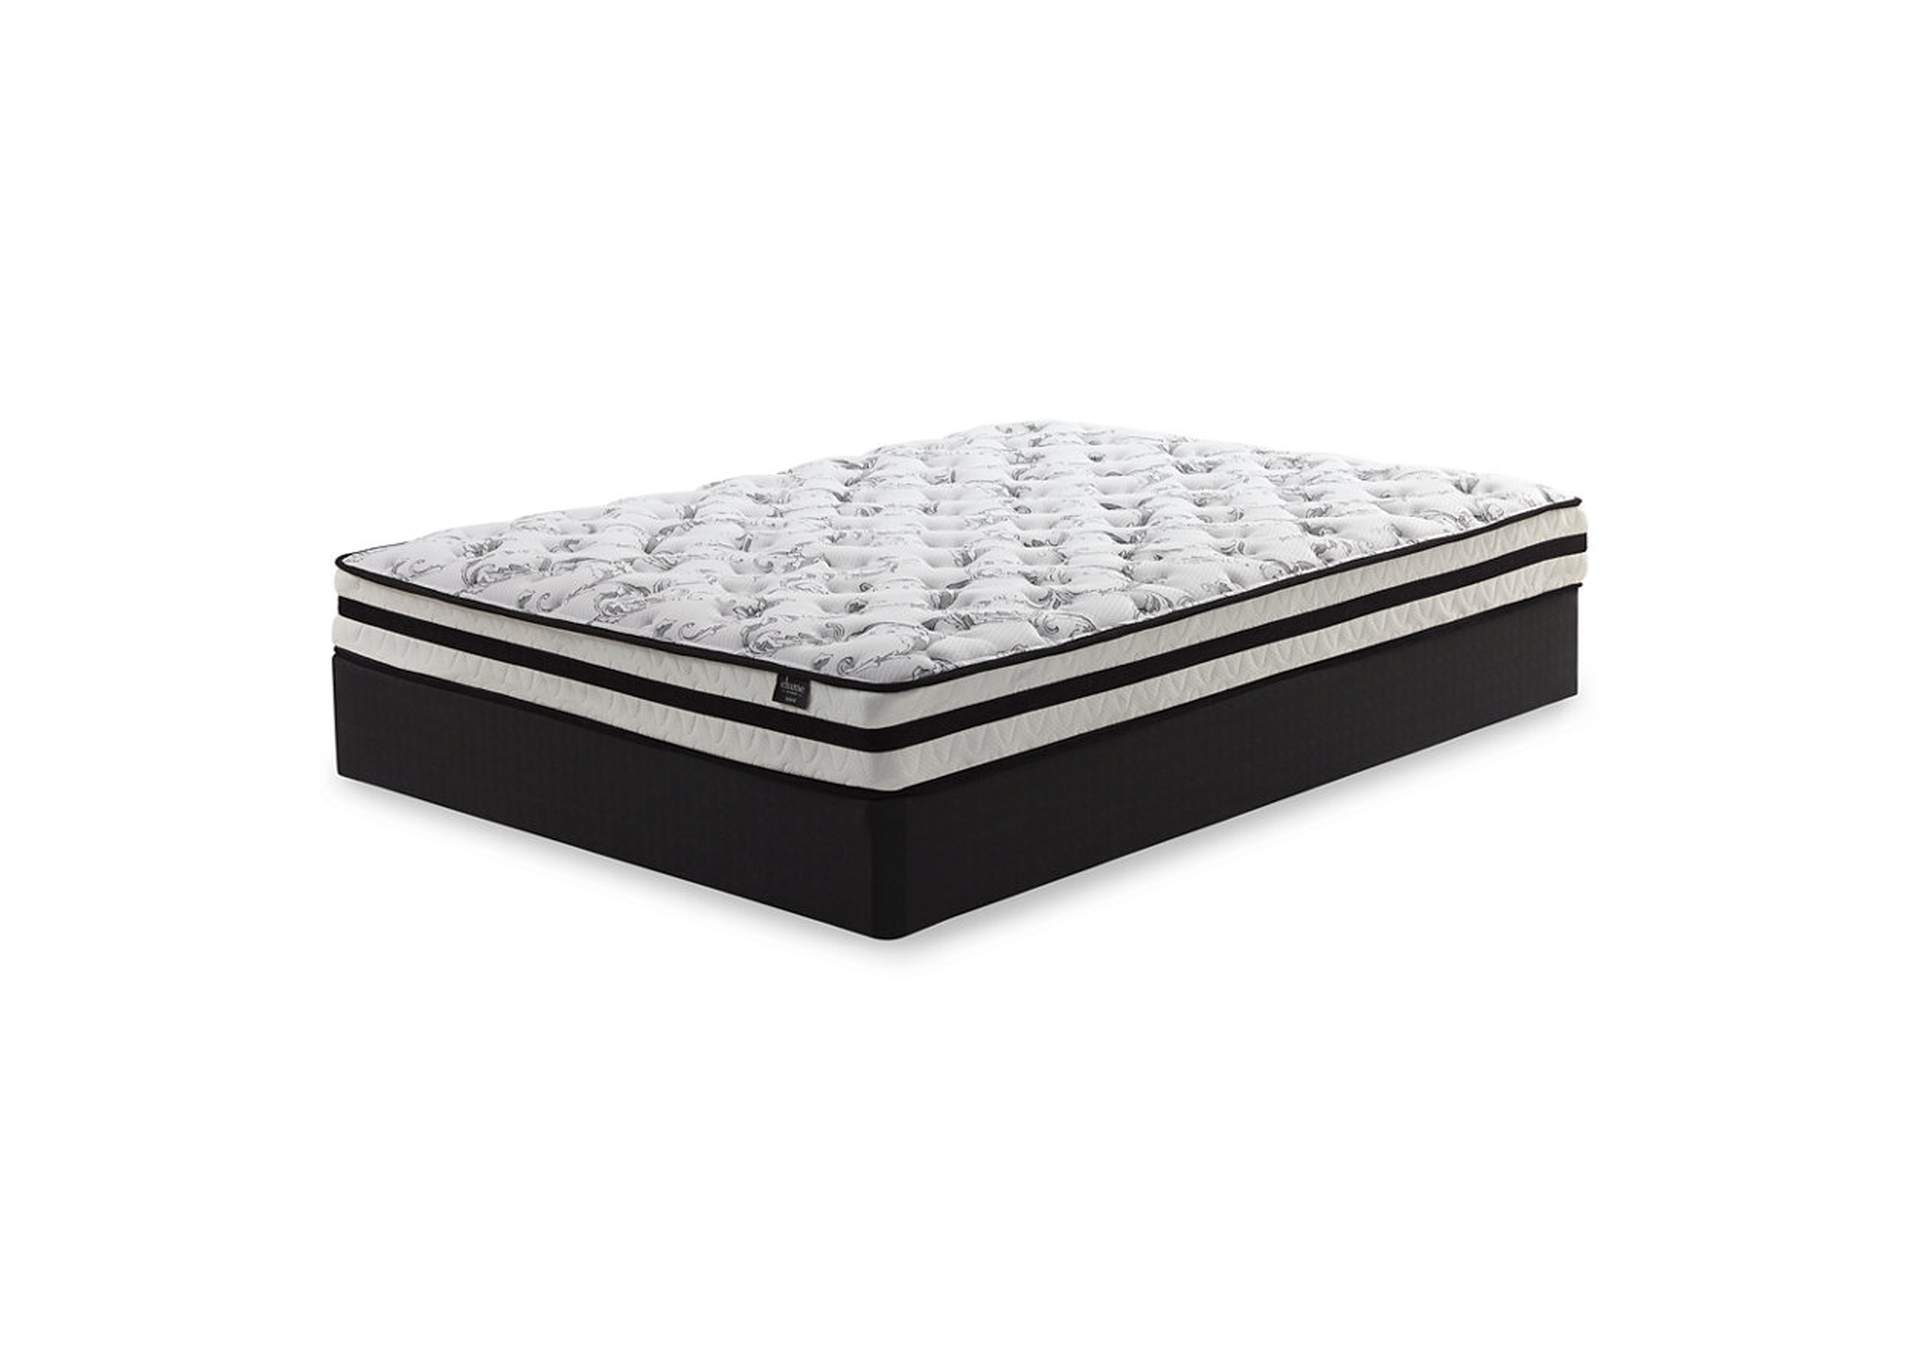 8 Inch Chime Innerspring Full Mattress in a Box,Direct To Consumer Express